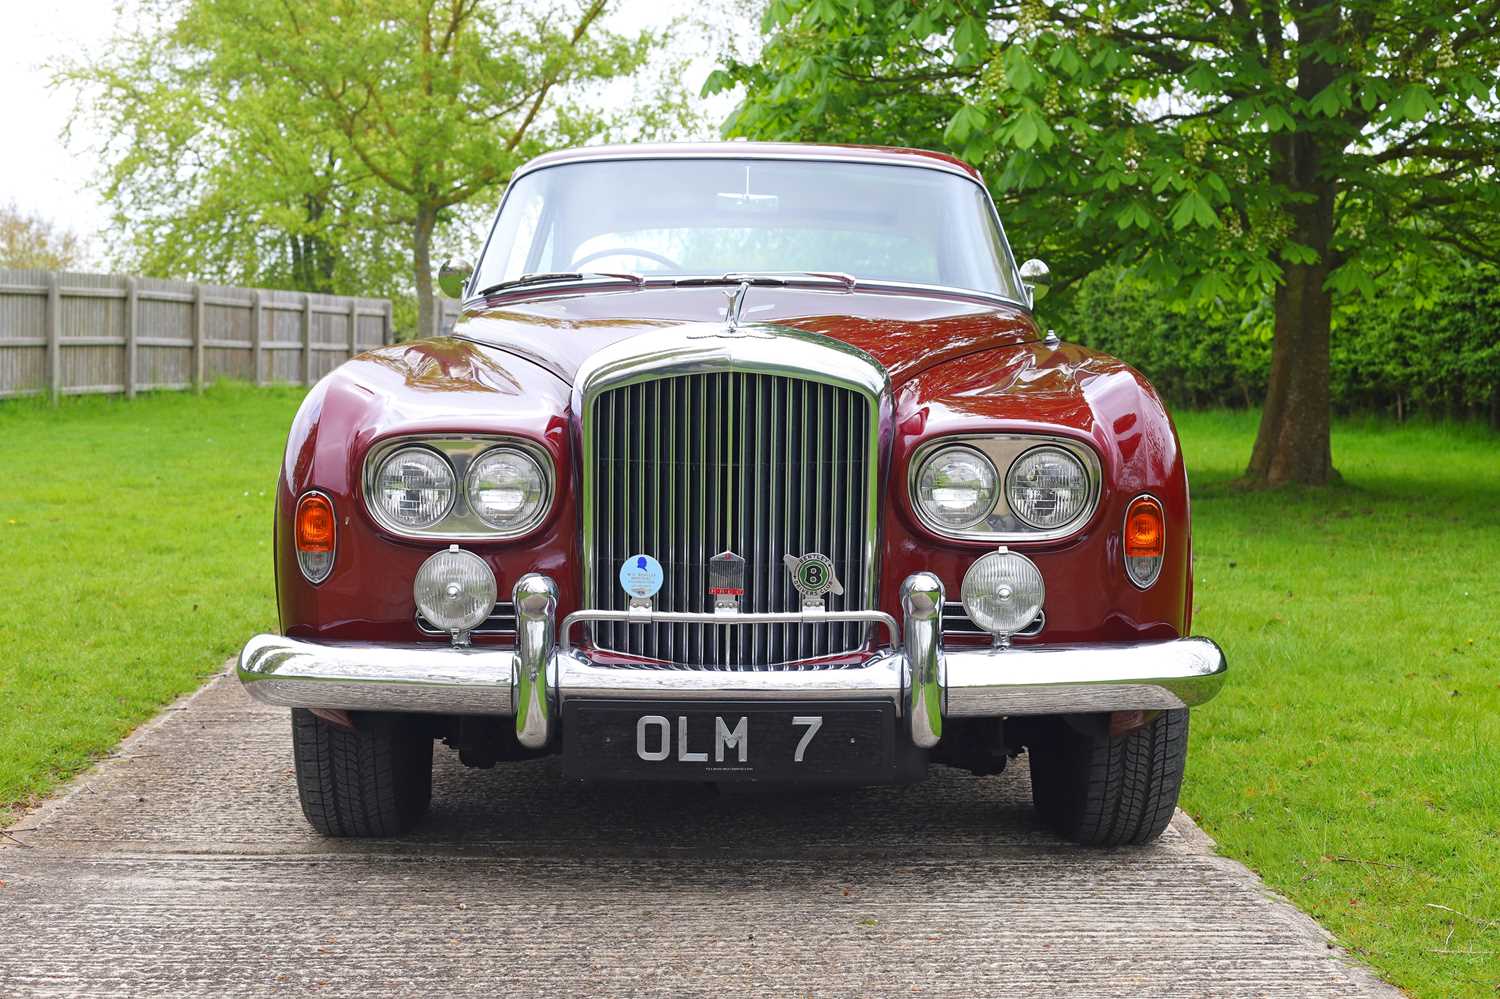 1963 Bentley S3 Continental Coupé - Image 4 of 43